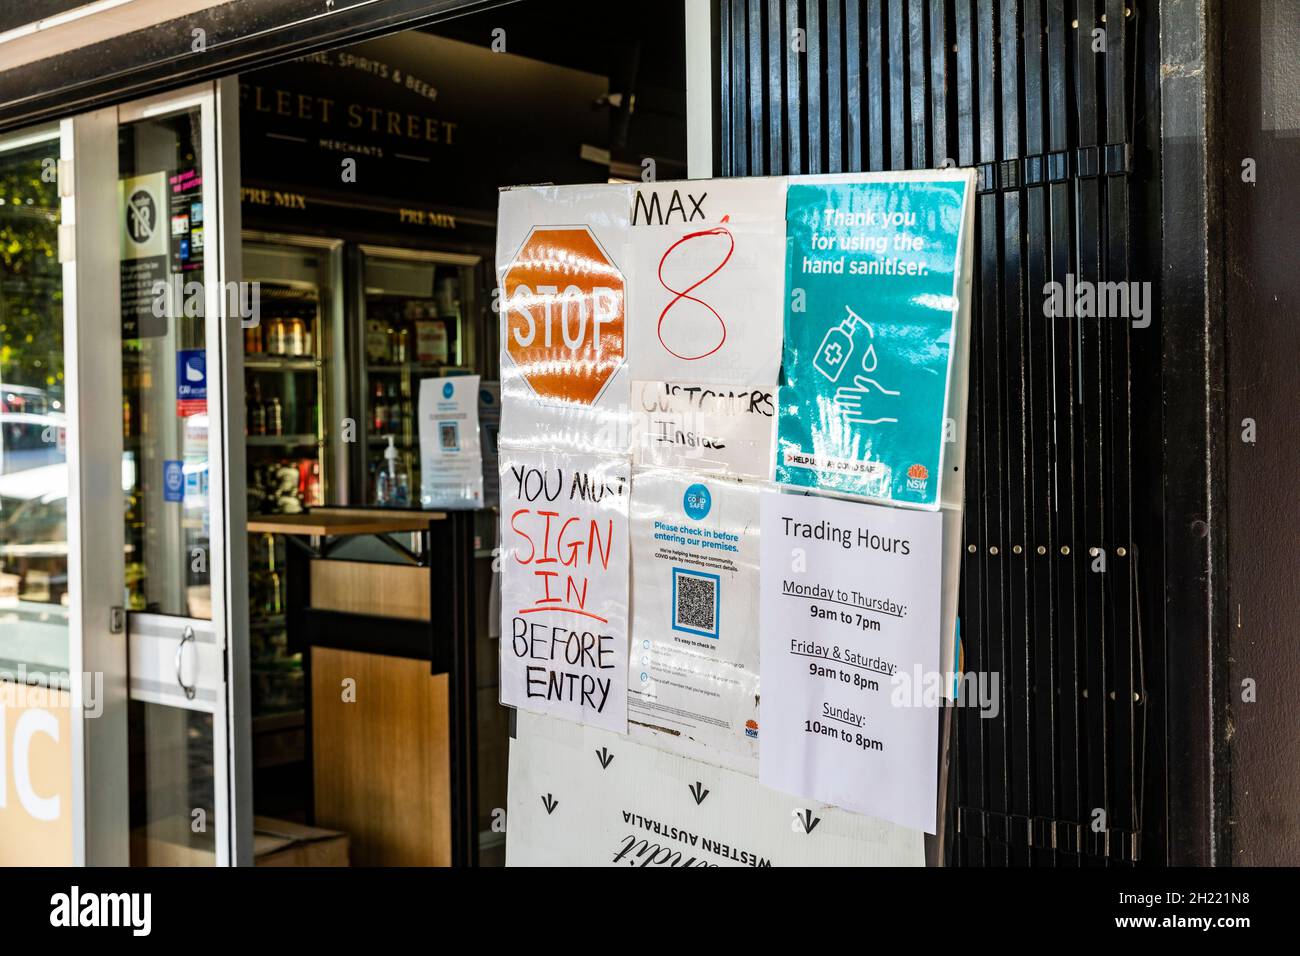 Liquor store in Sydney during covid 19 pandemic, requesting customers limit numbers in store and sign in using Service NSW qr scan code Stock Photo